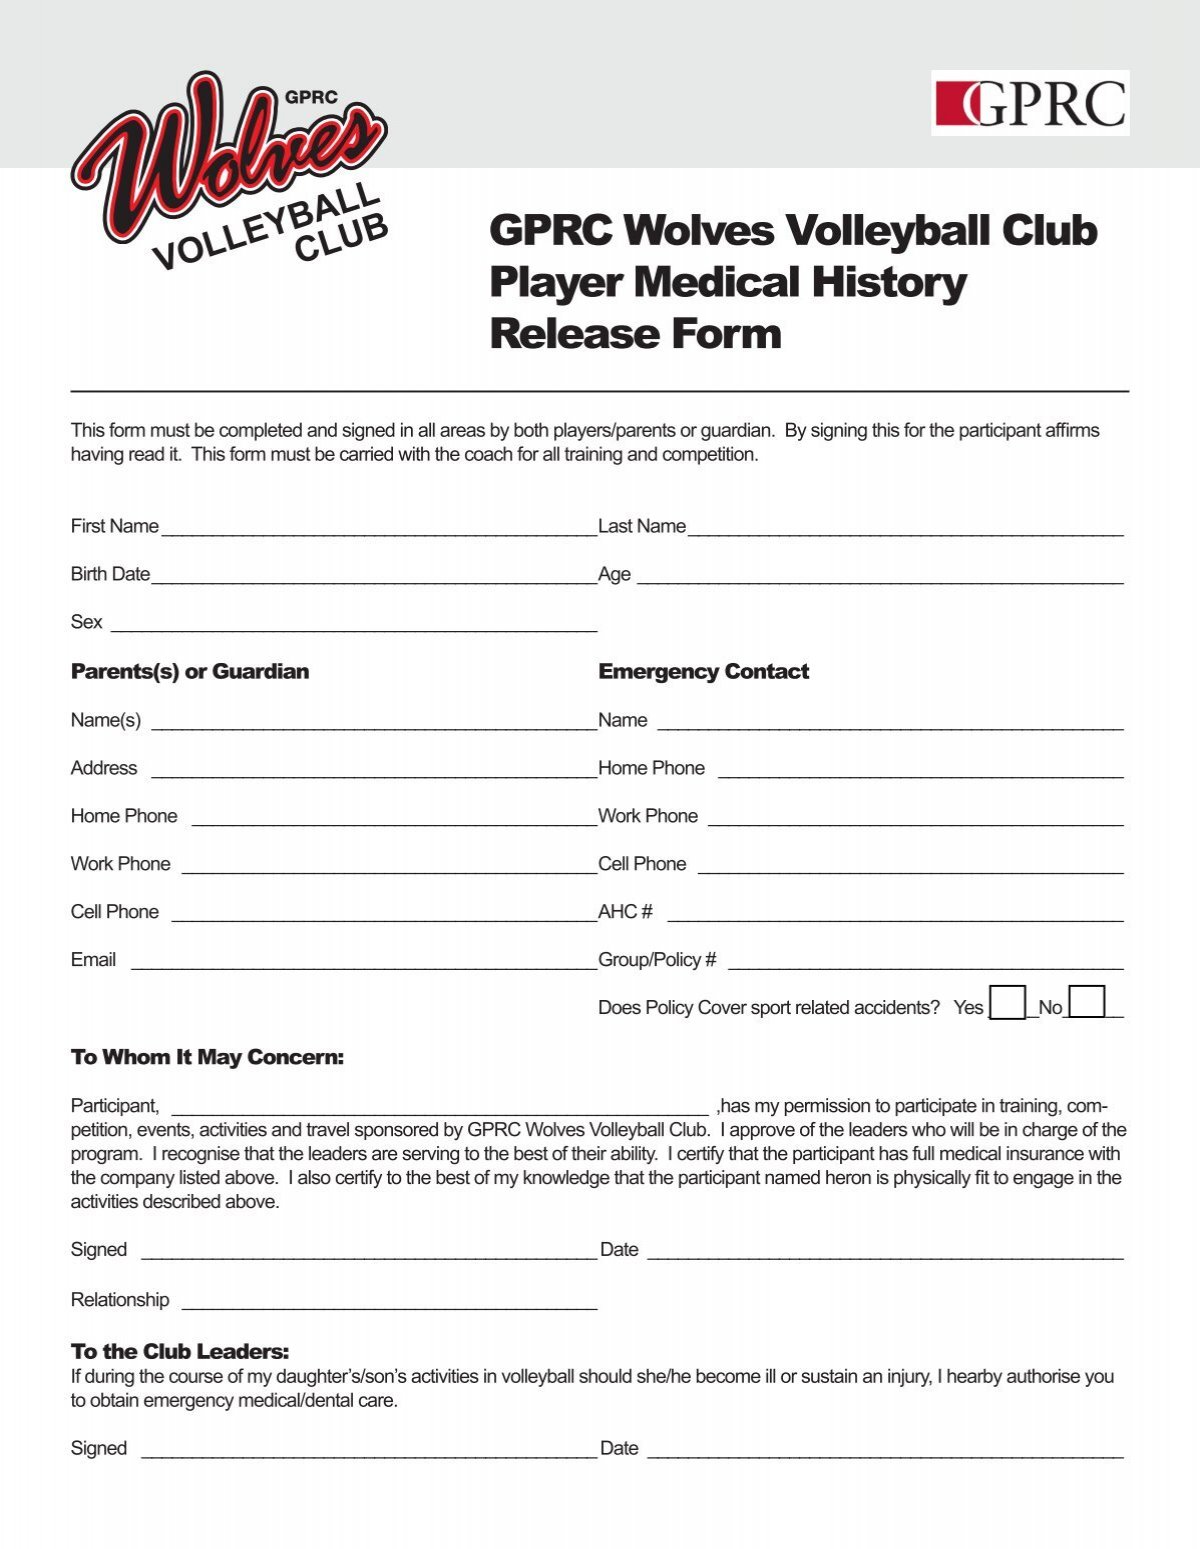 gprc-wolves-volleyball-club-player-medical-history-release-form